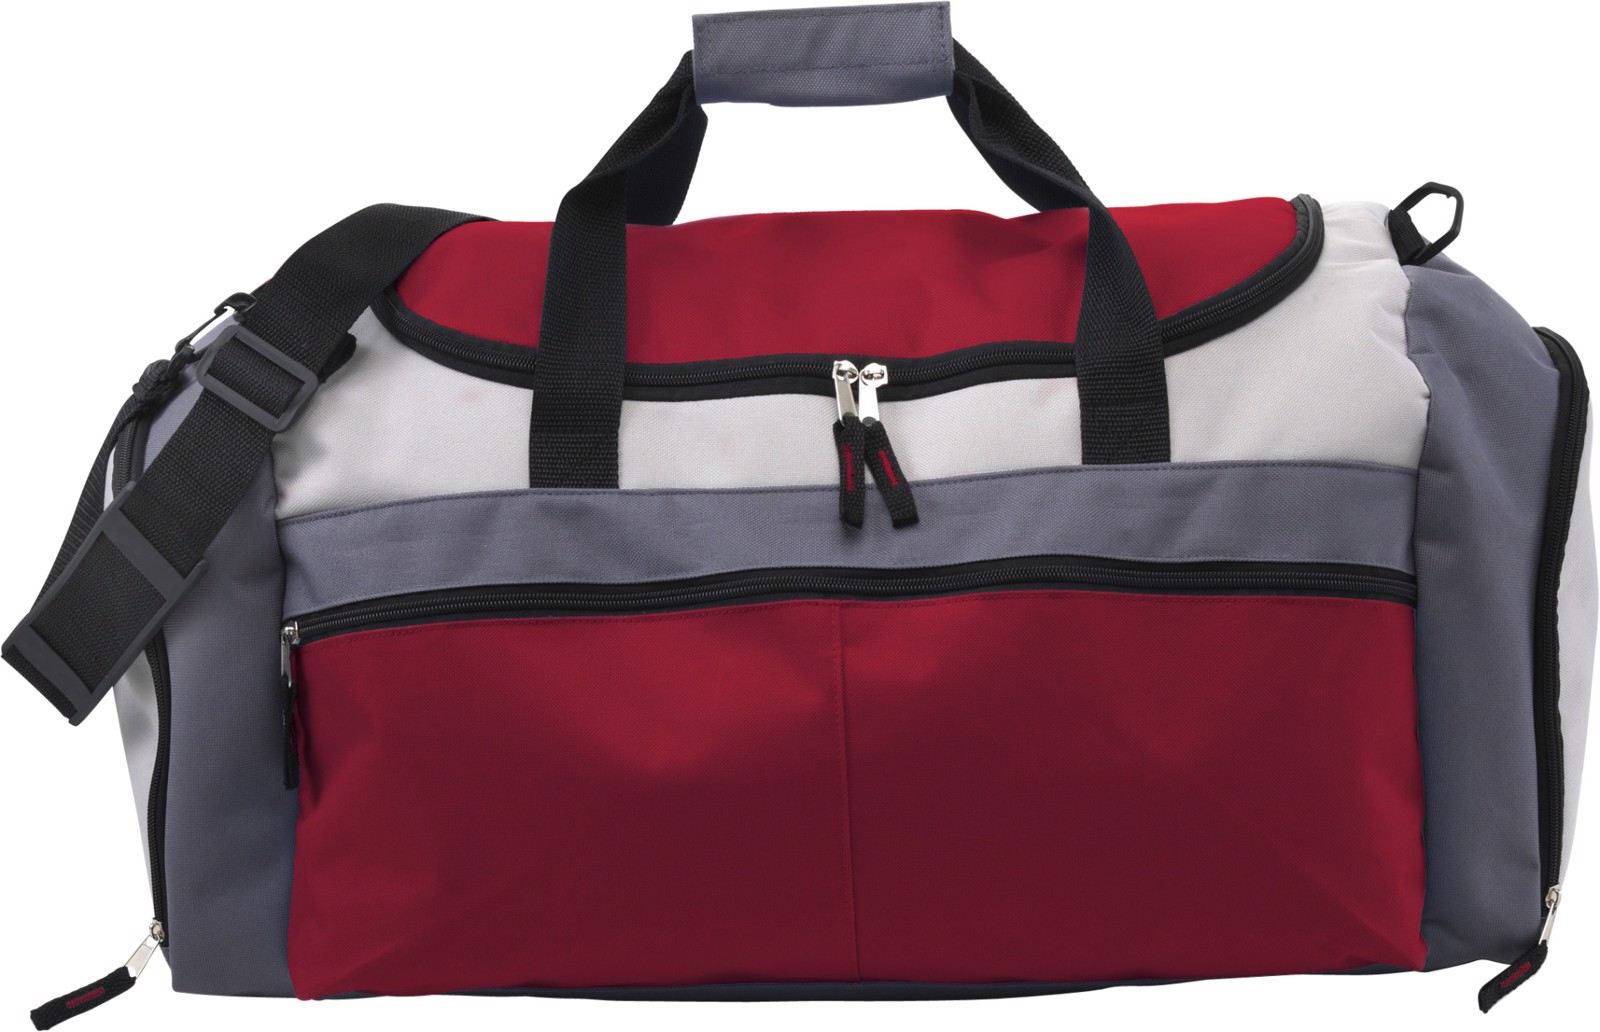 Polyester (600D) sports bag - Red